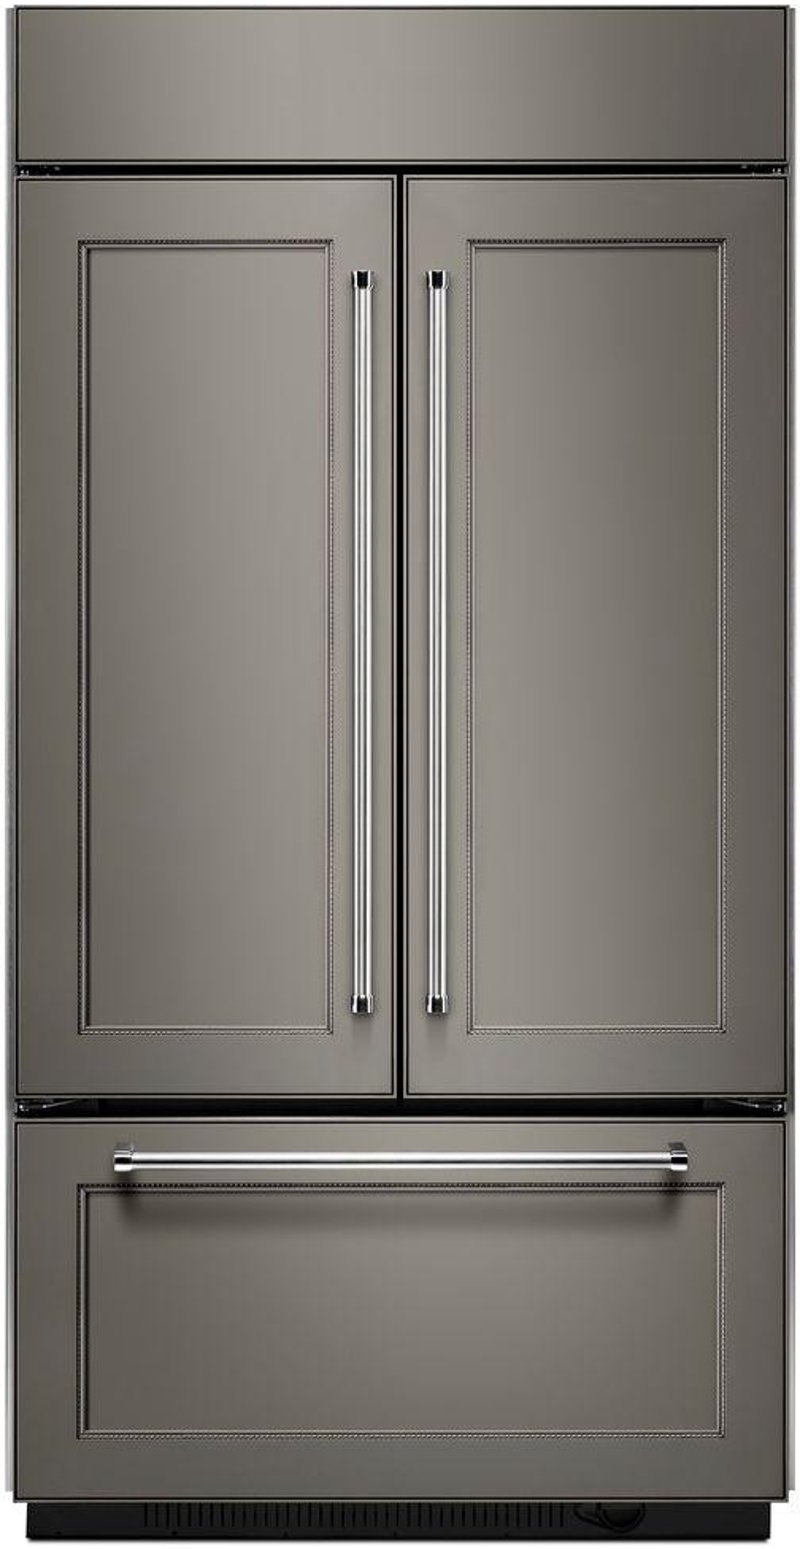 KitchenAid Built-In French Door Refrigerator - 42 Inch Panel Ready | RC